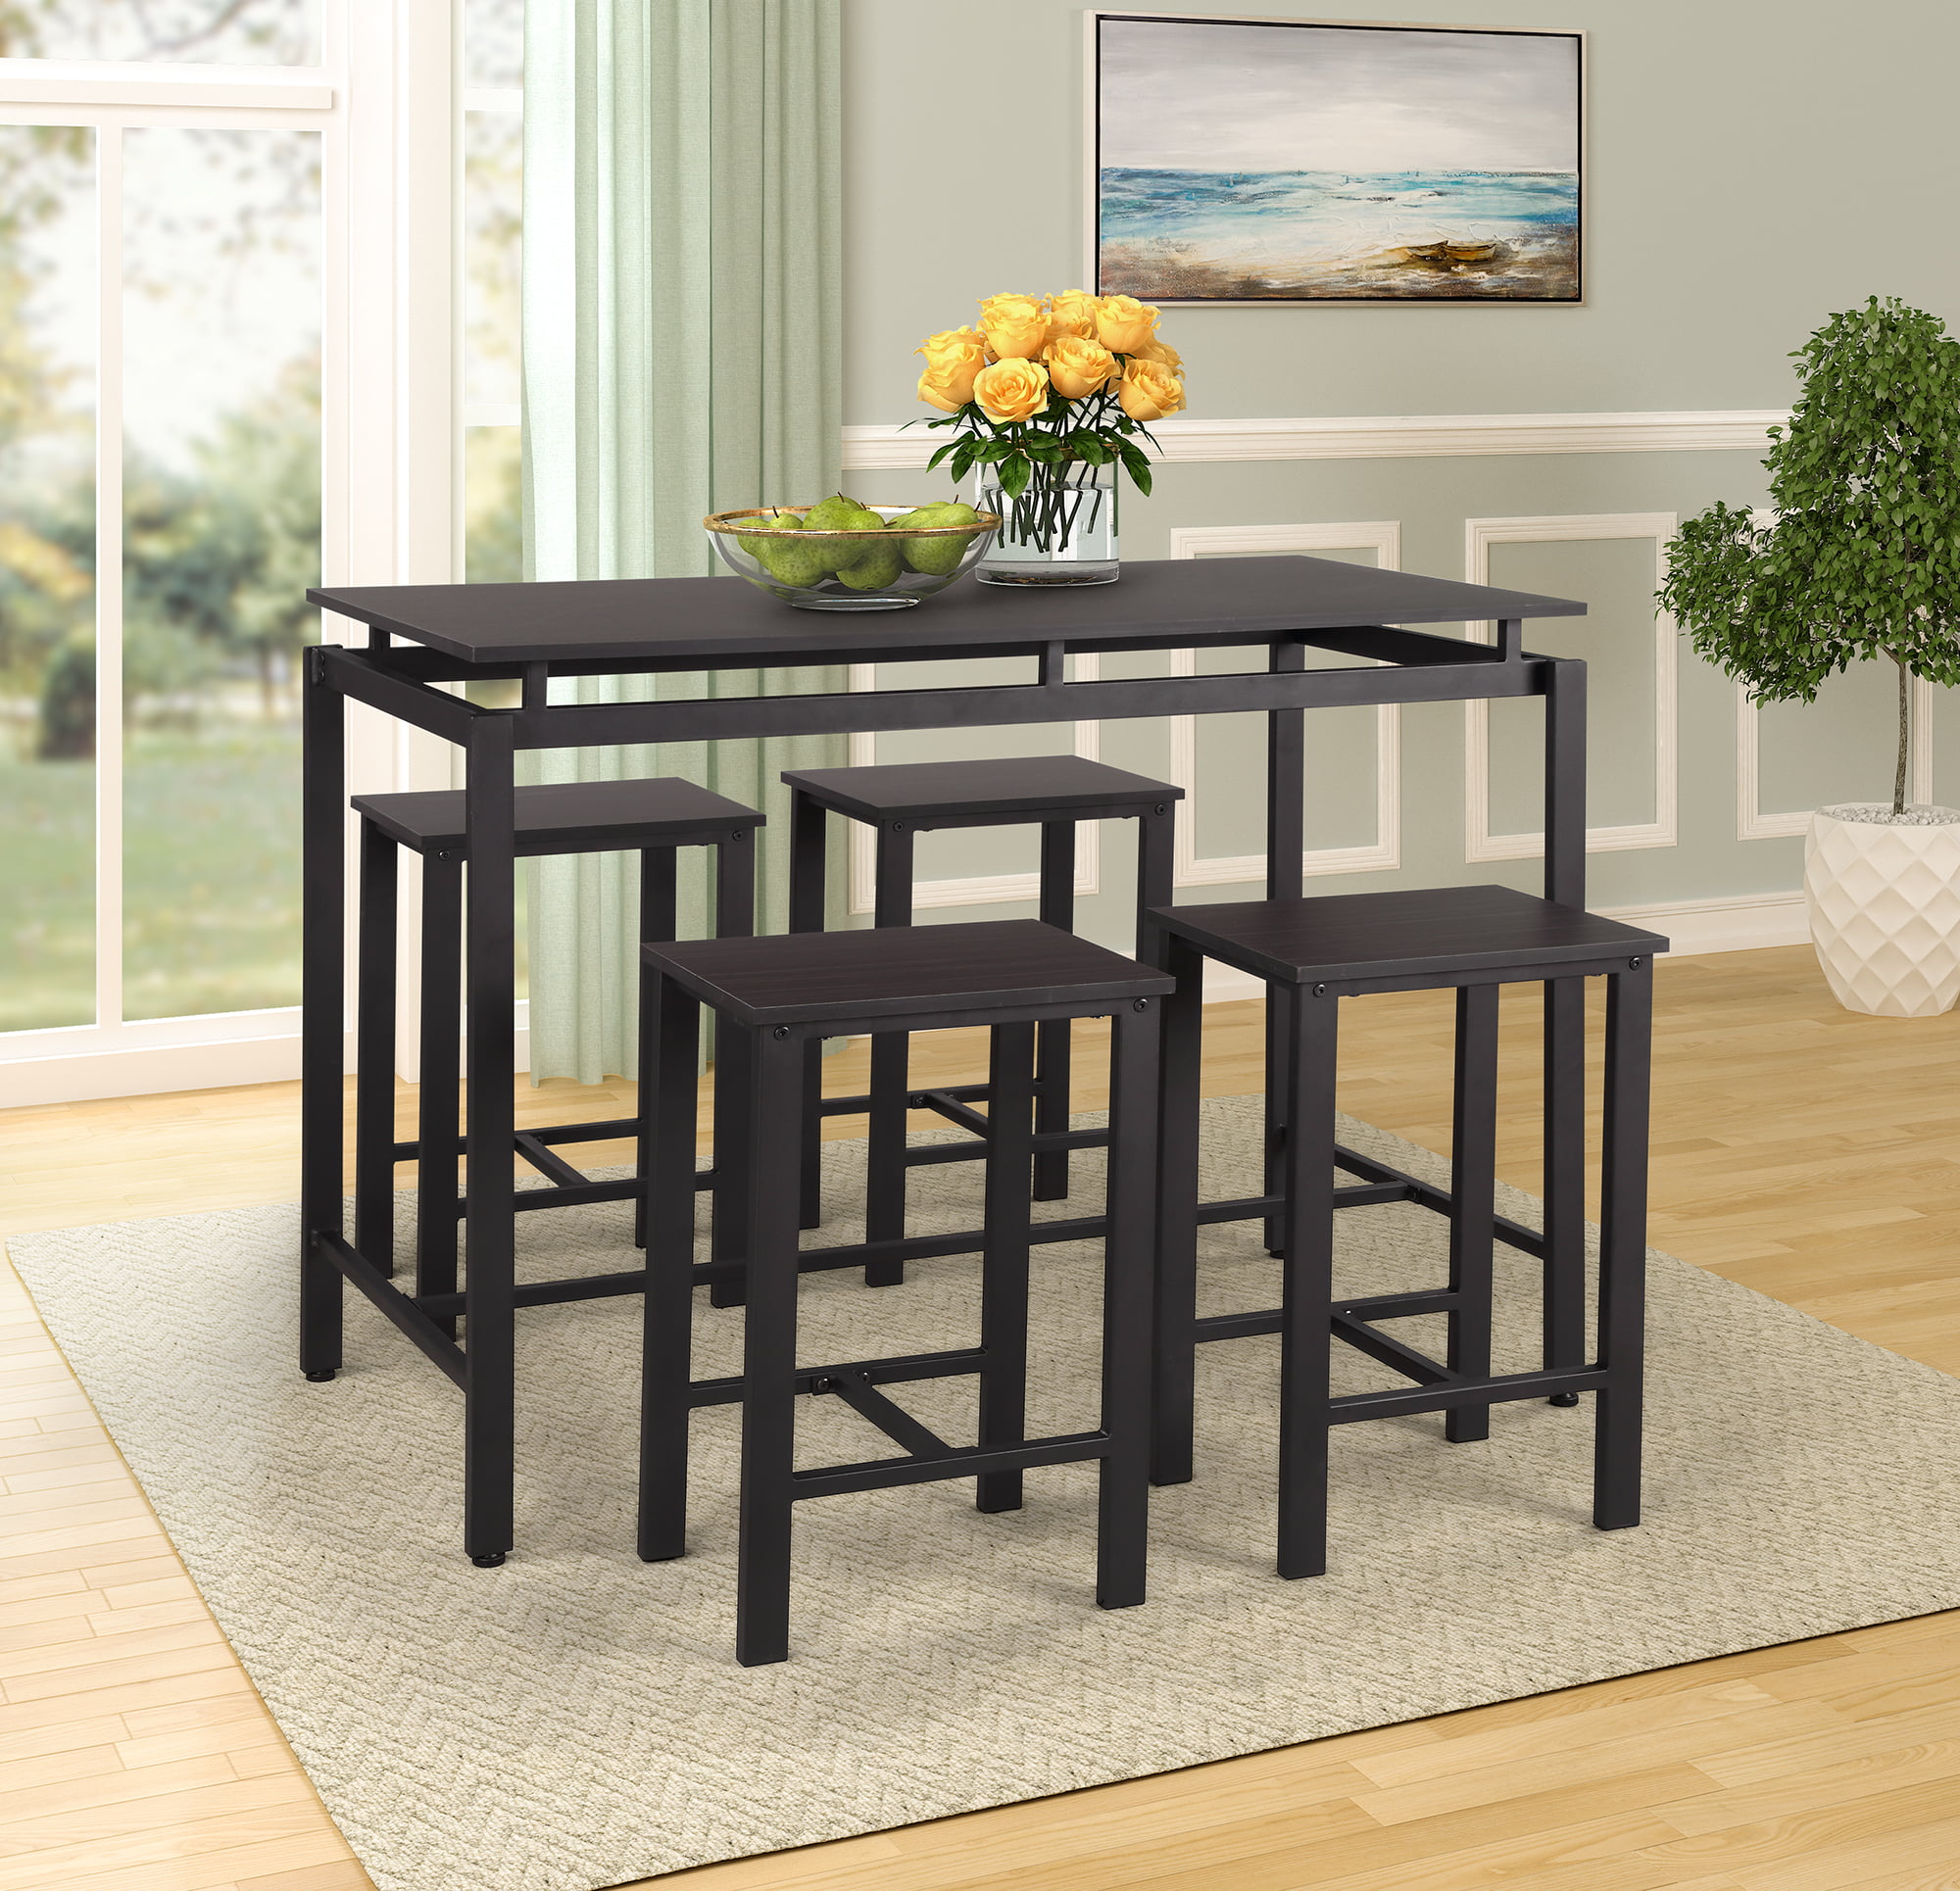 Bar Style Table And Chairs, Pub Style Kitchen Table And Chairs